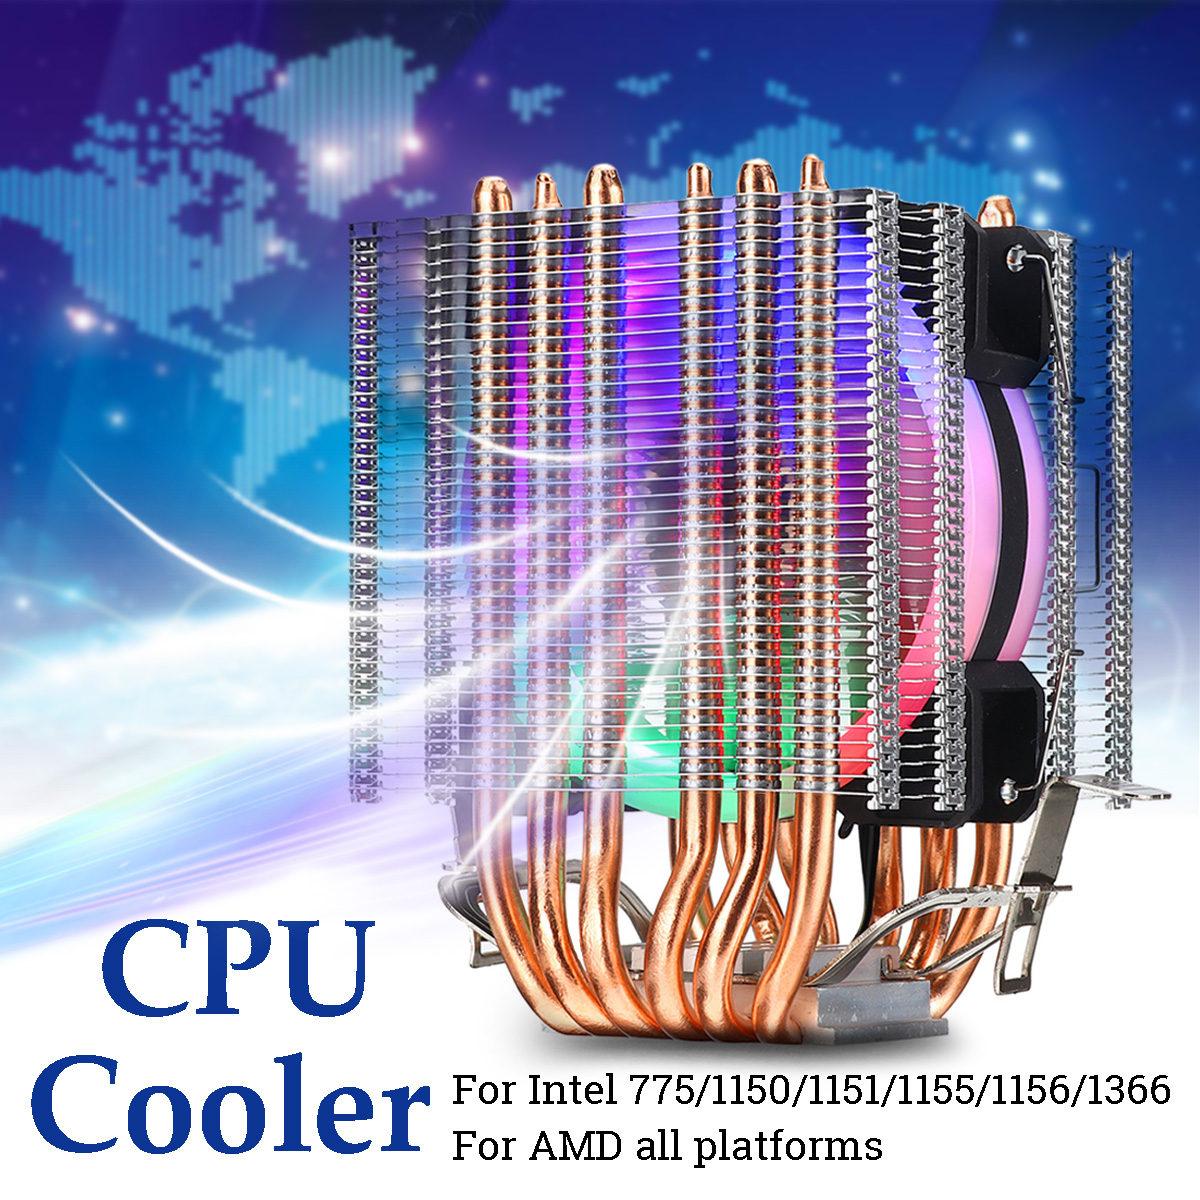 3 Pin CPU Cooler Cooling Fan Heatsink for Intel 775/1150/1151/1155/1156/1366 and AMD All Platforms 5 Colors Lighting 8